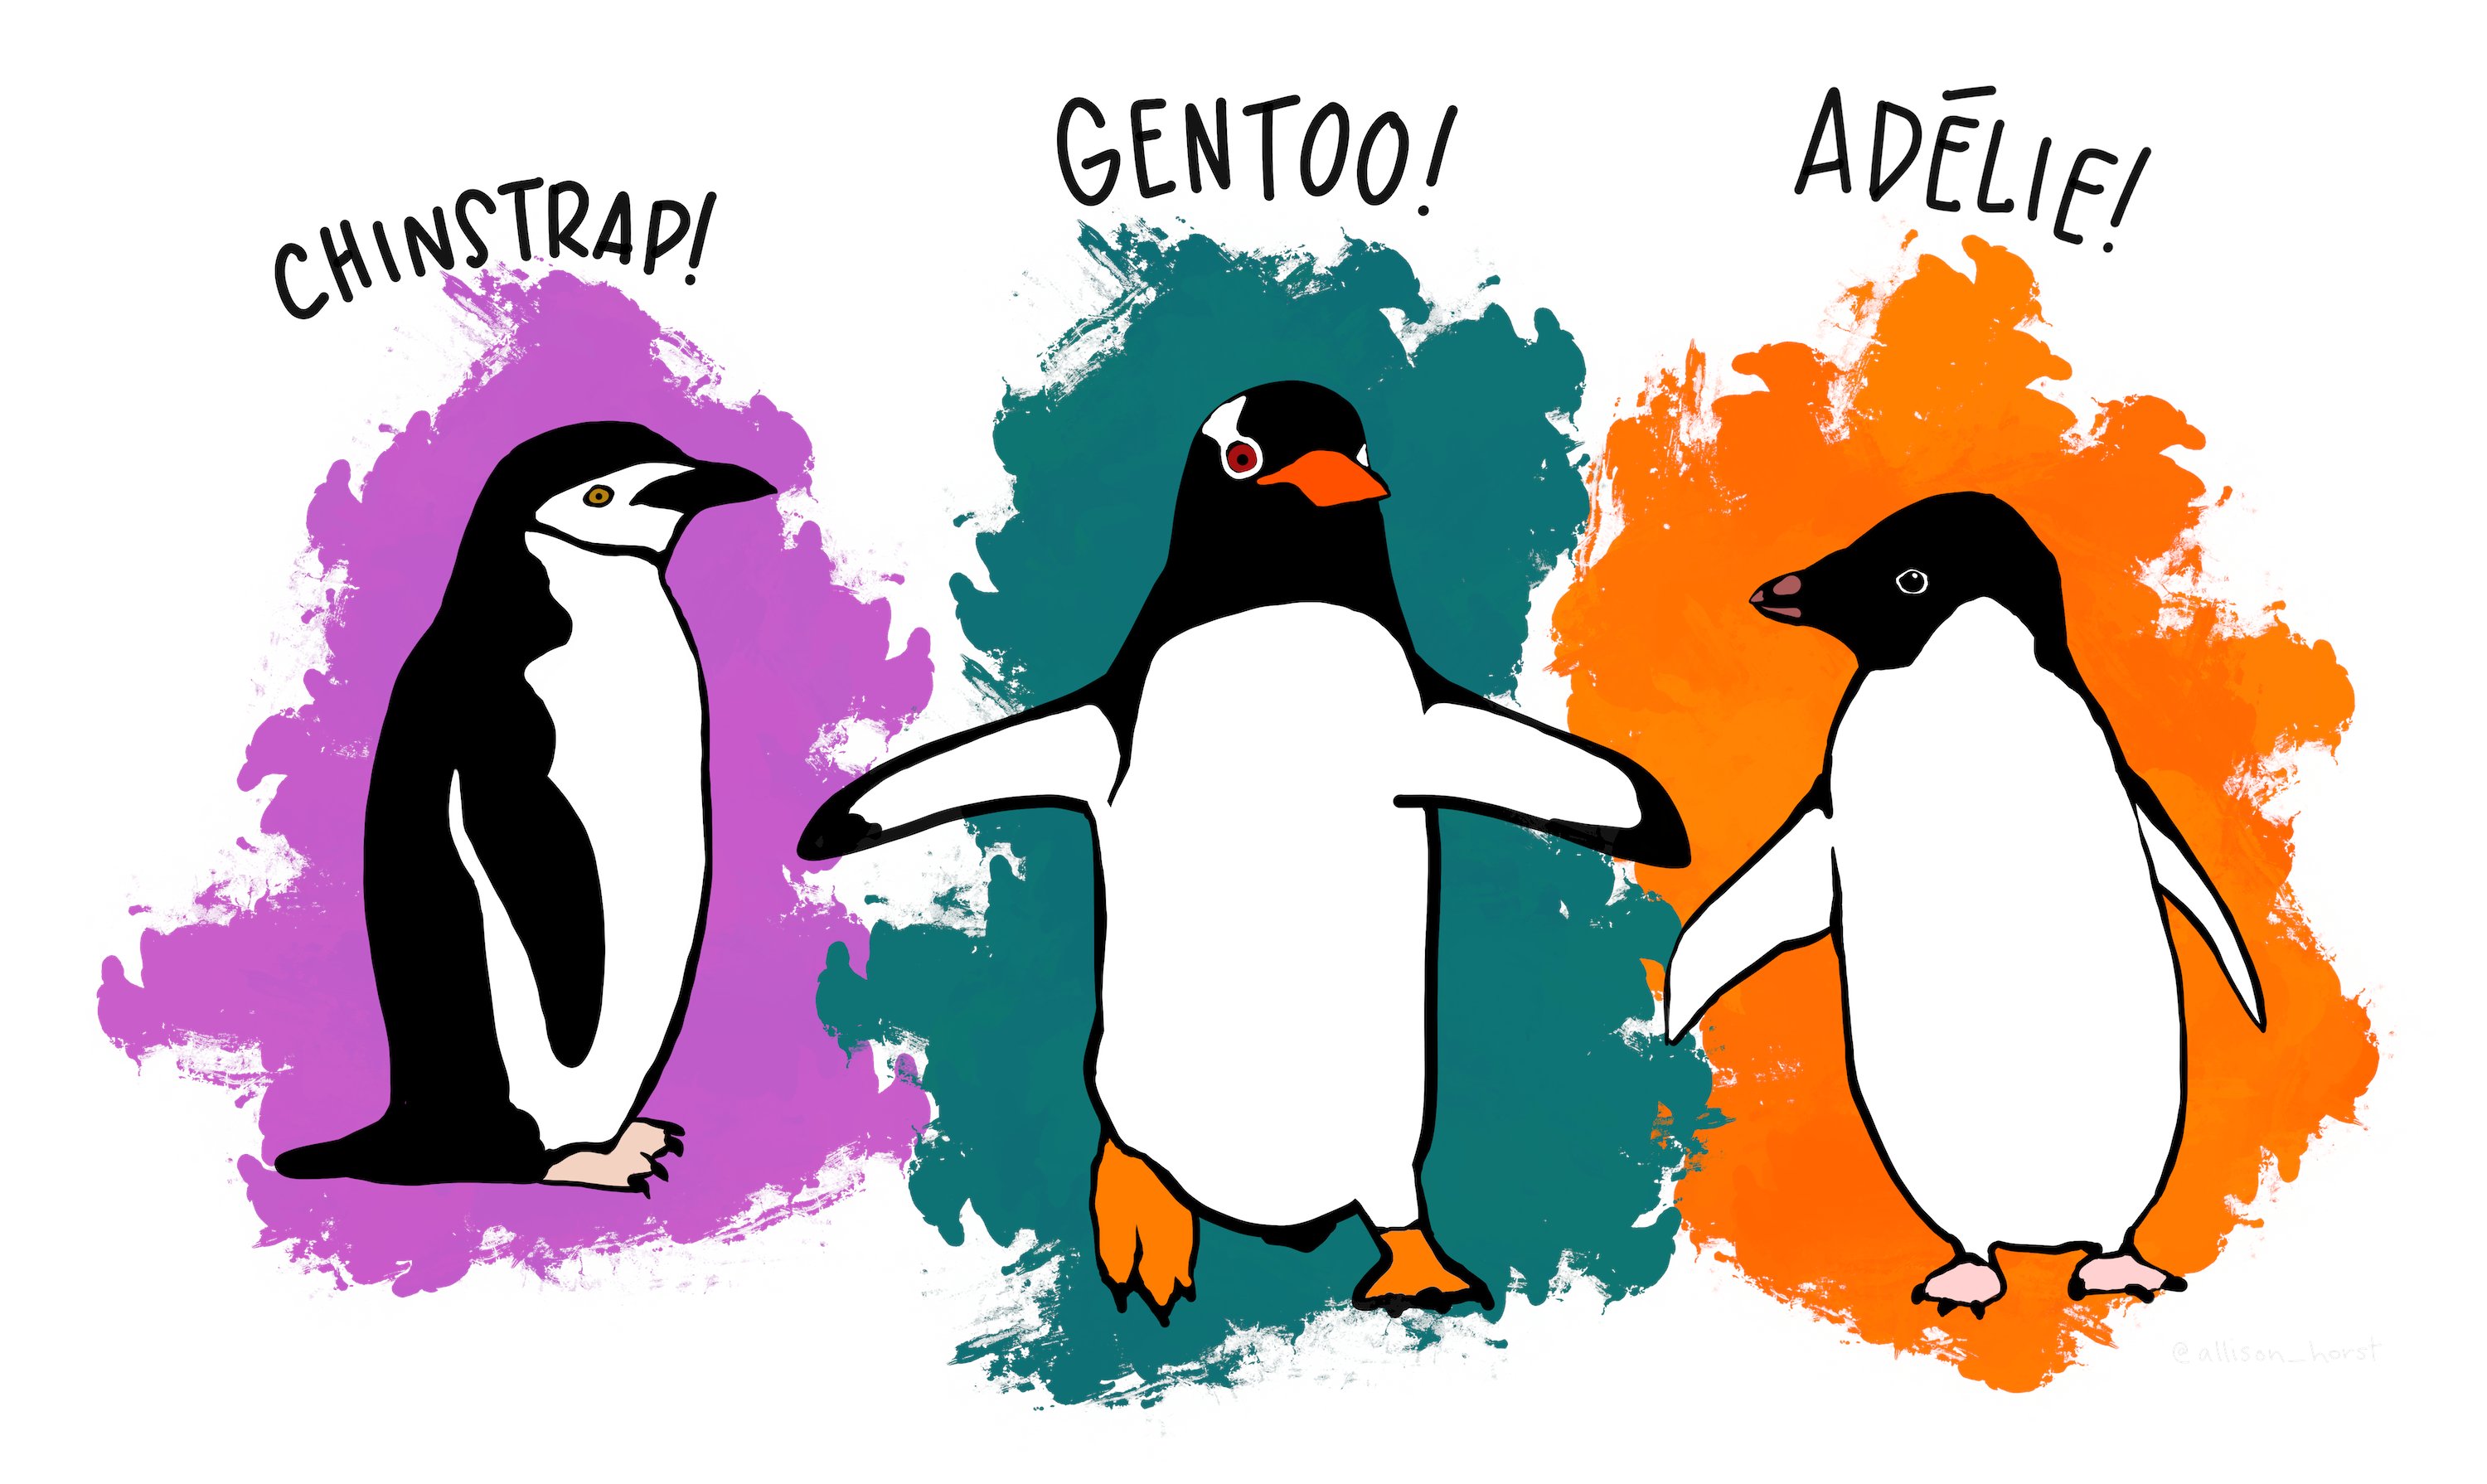 An illustration showing the Chinstrap, Gentoo and Adélie penguin species